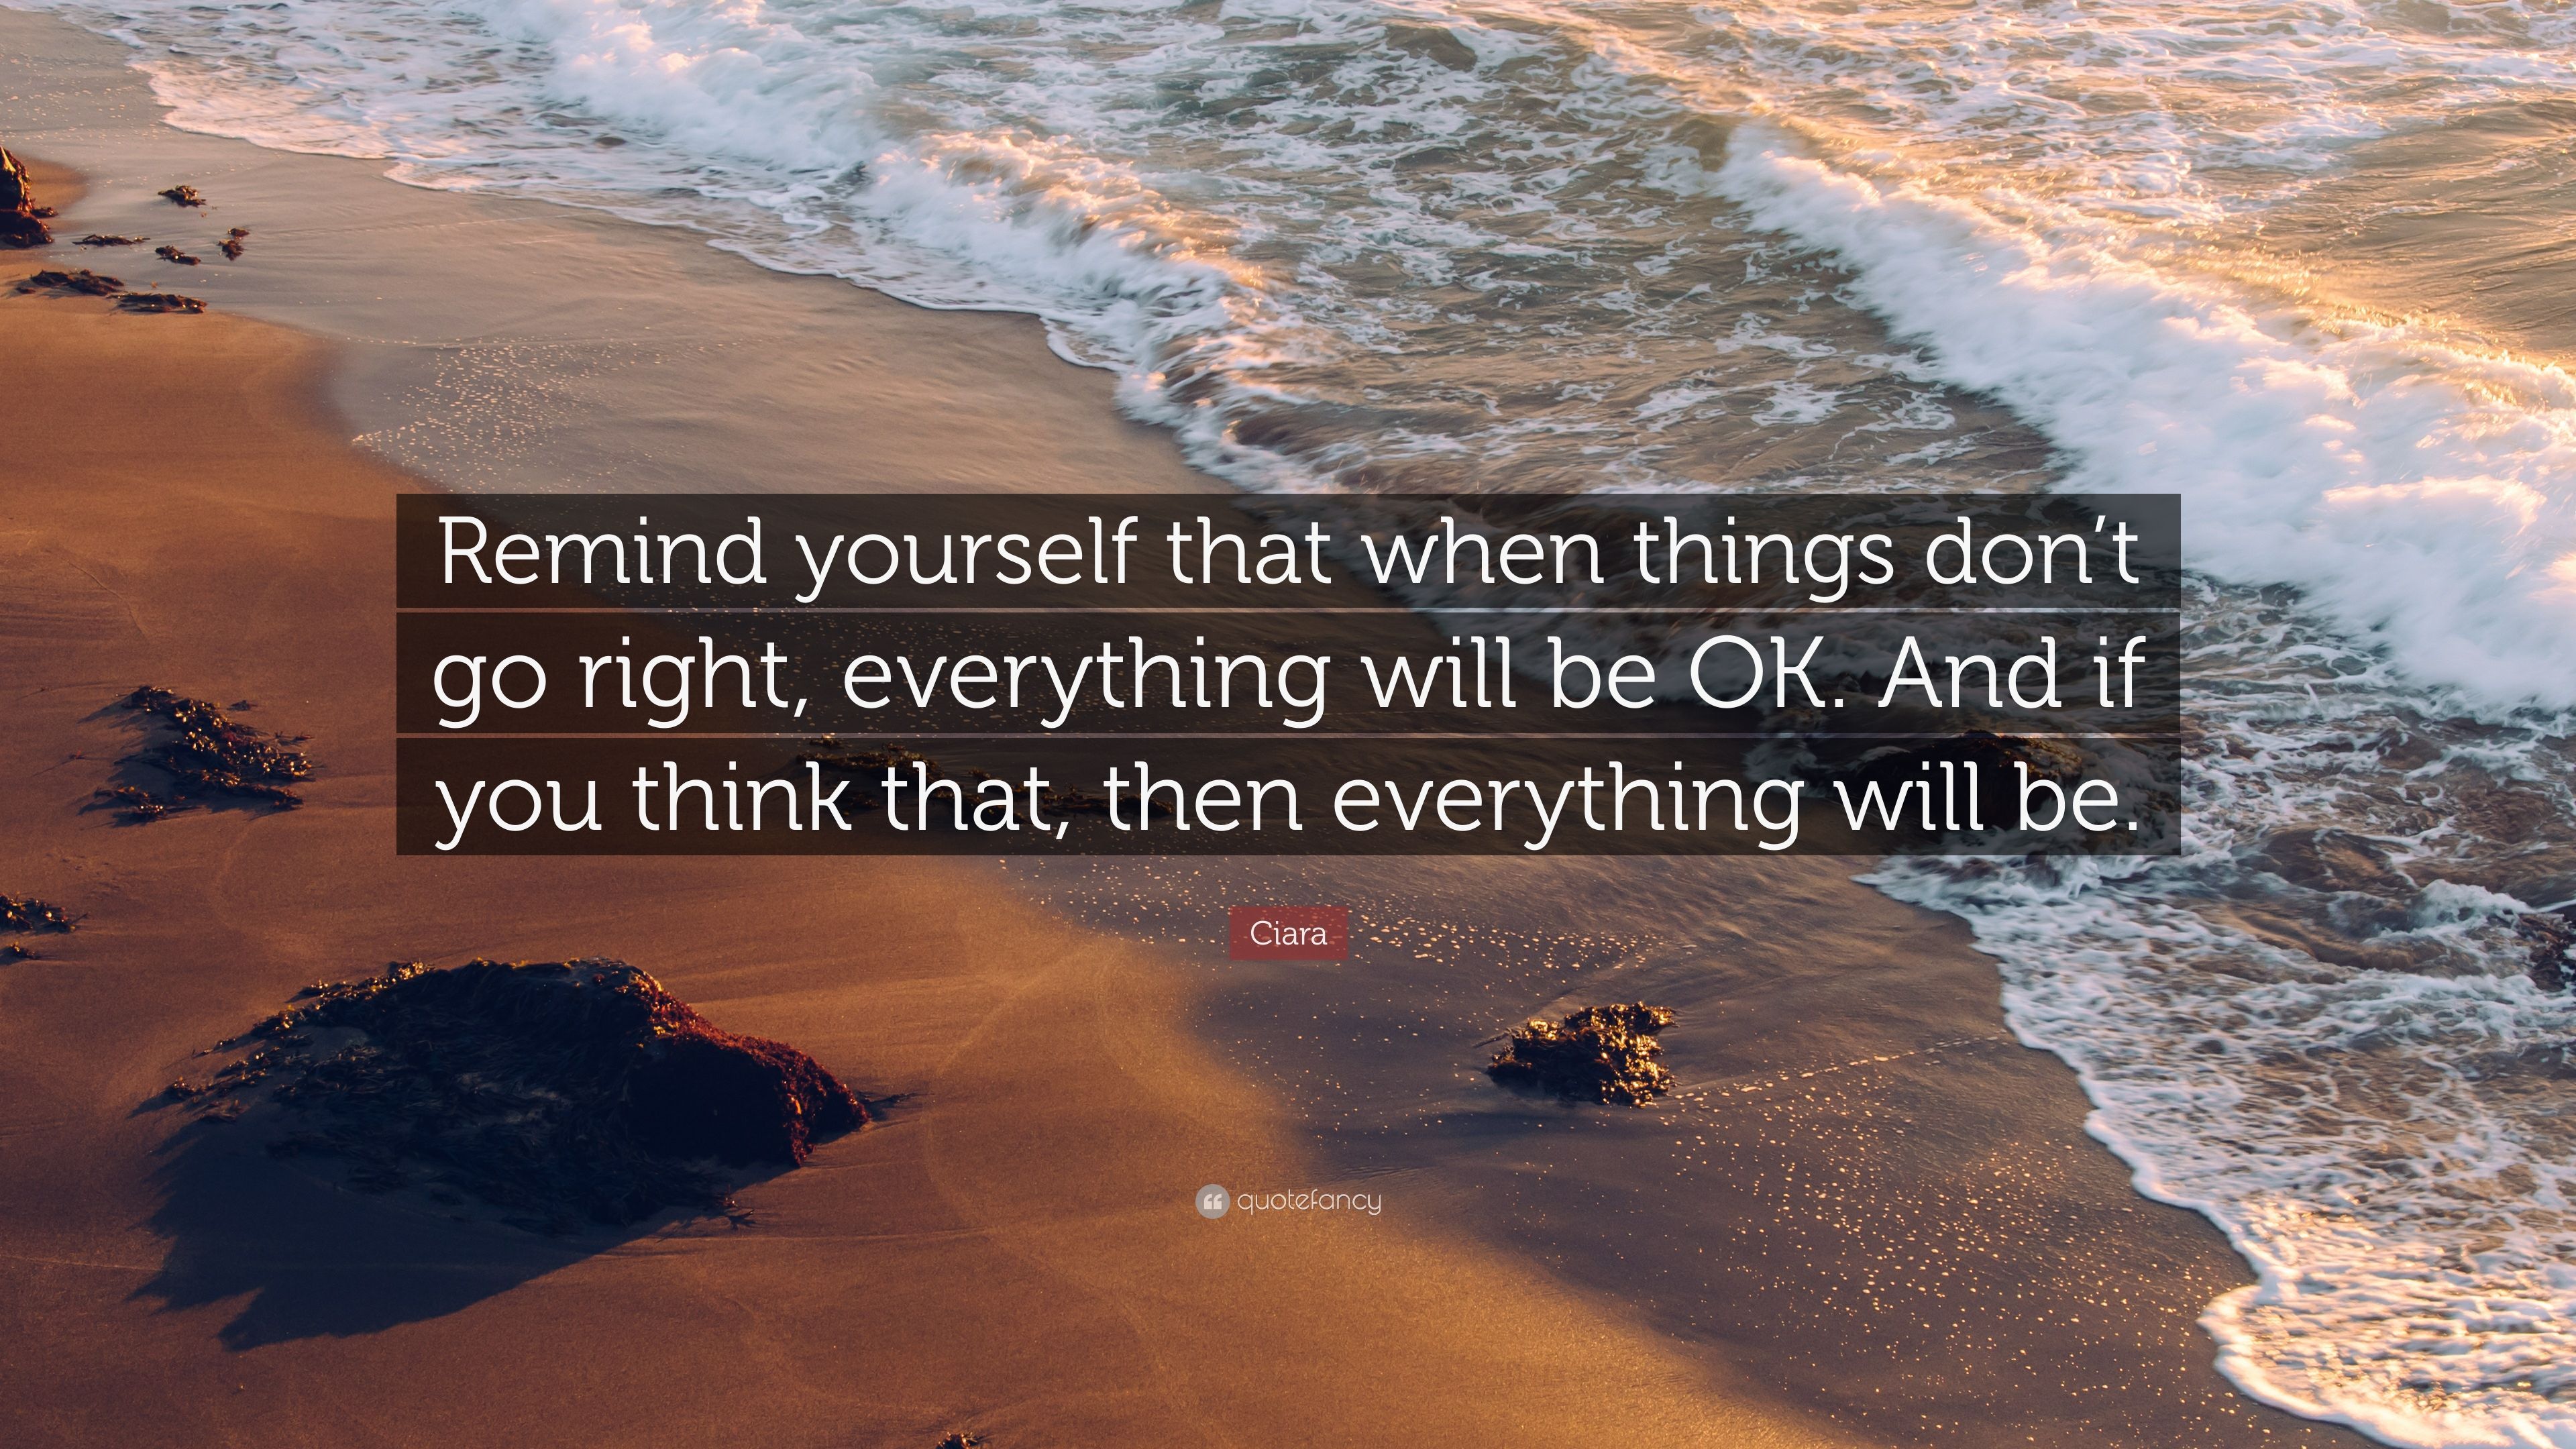 Ciara Quote: “Remind yourself that when things don't go right, everything will be OK. And